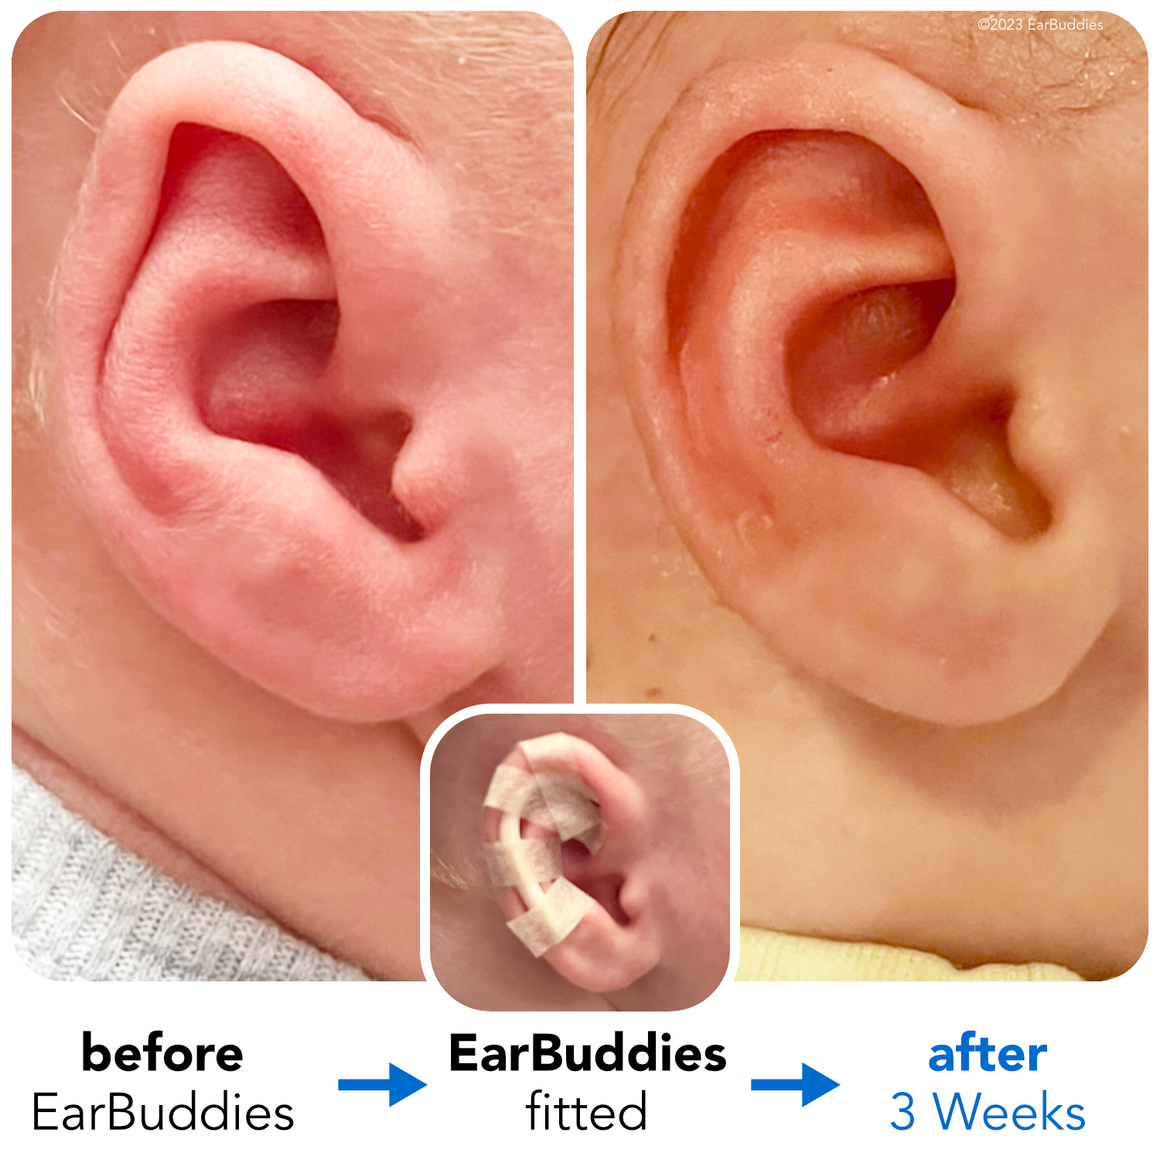 Second Earbuddies(TM) tape change – the challenging one!